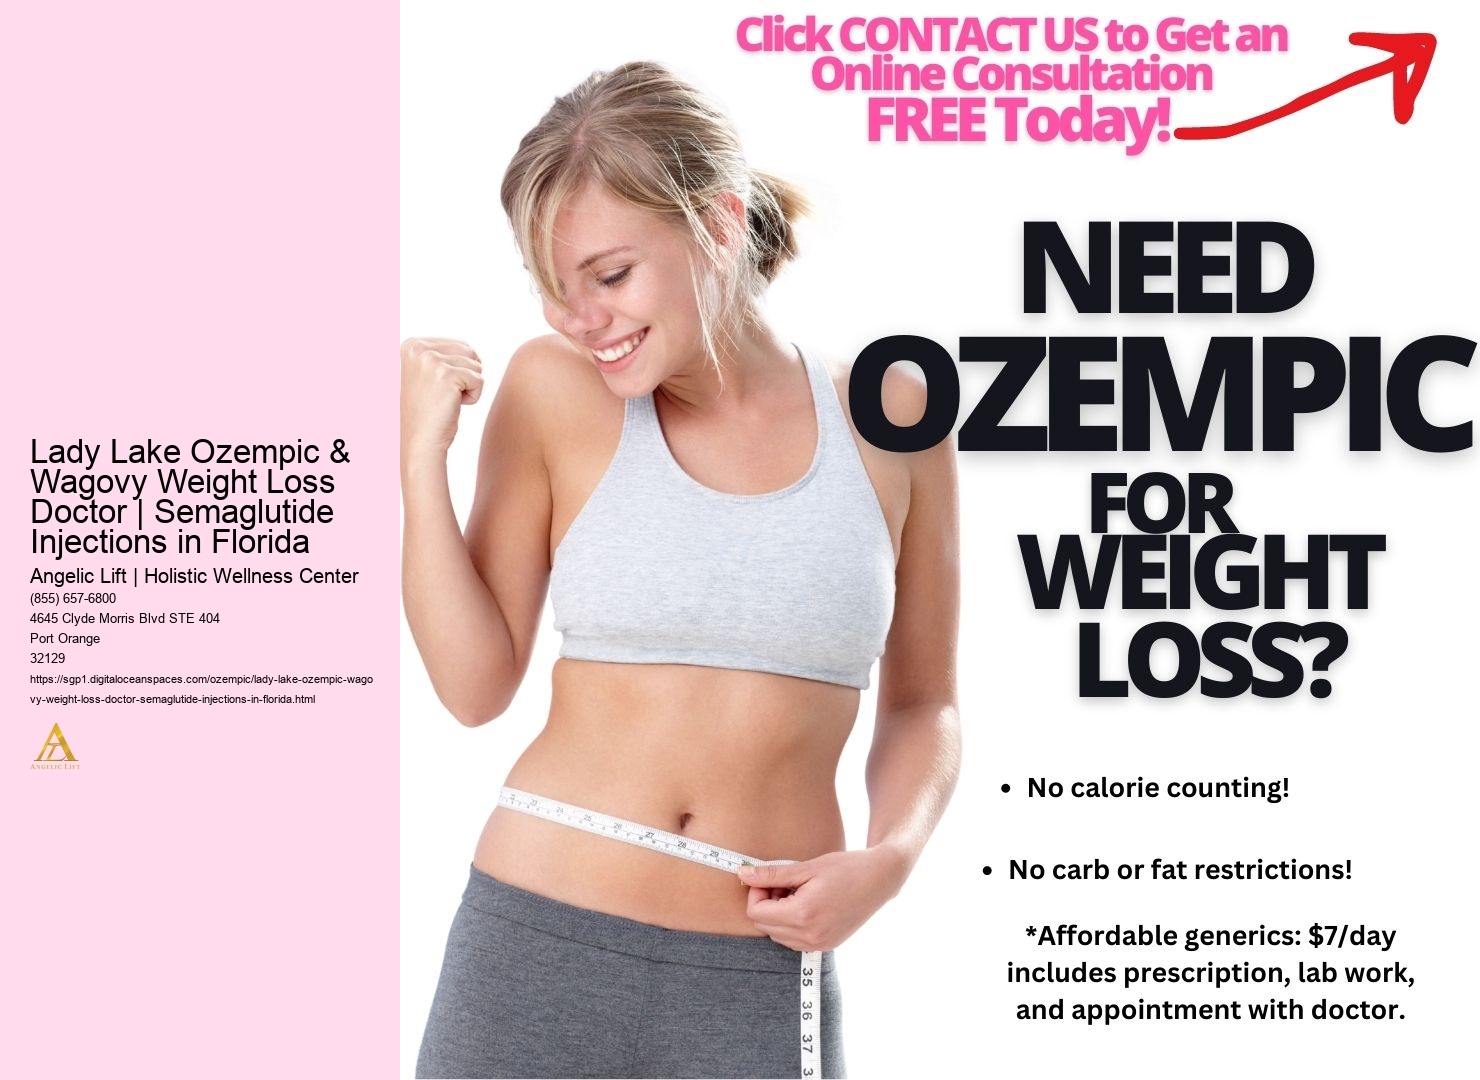 Lady Lake Ozempic & Wagovy Weight Loss Doctor | Semaglutide Injections in Florida